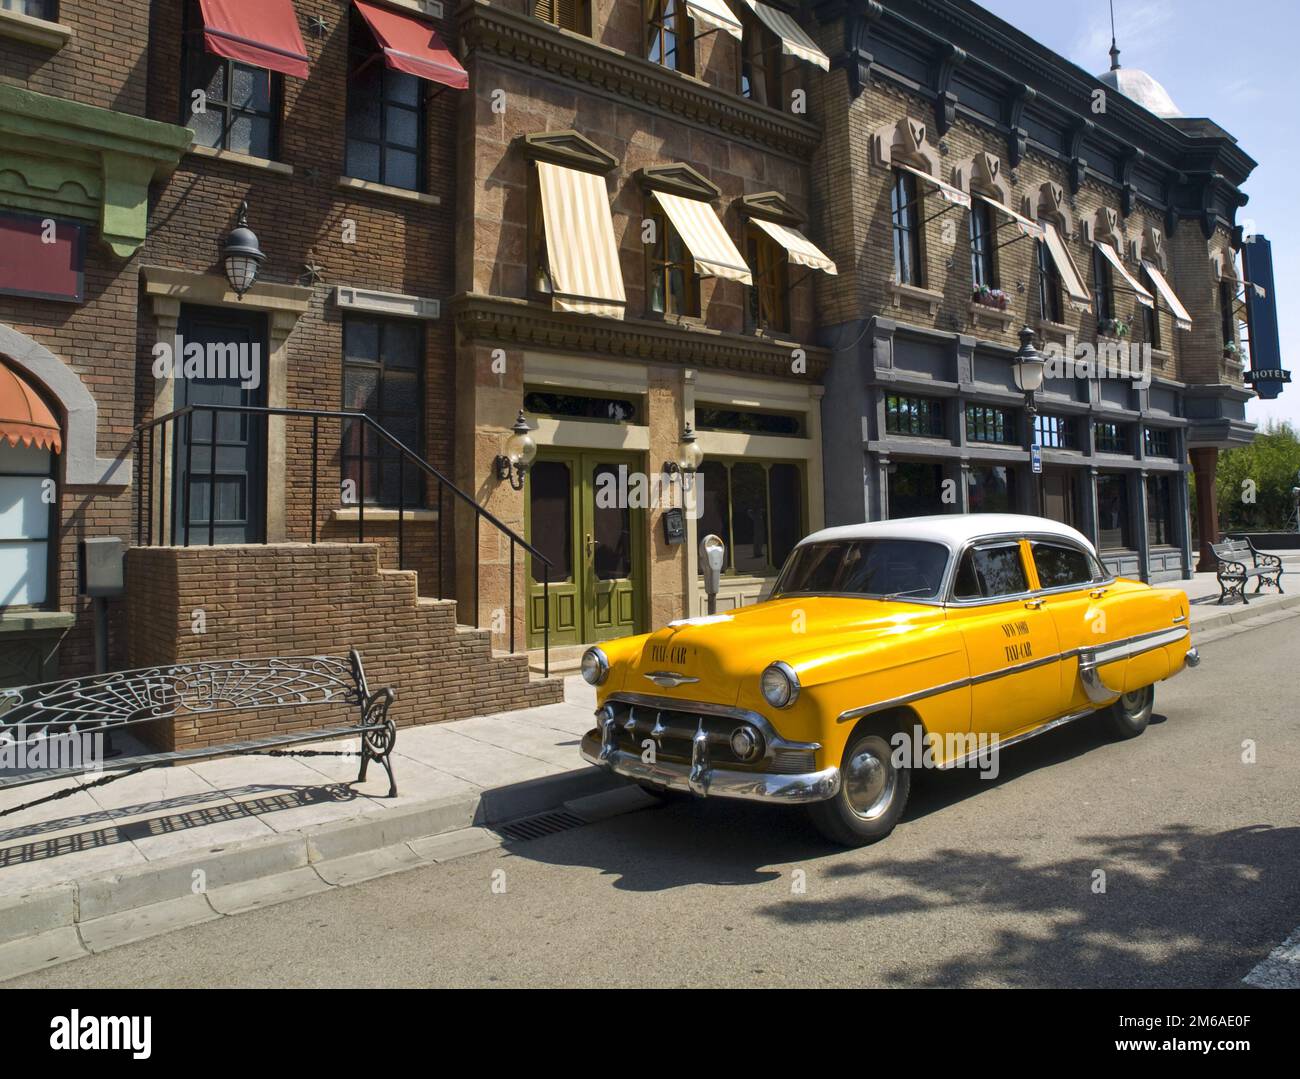 Old American Taxi in a old town Stock Photo